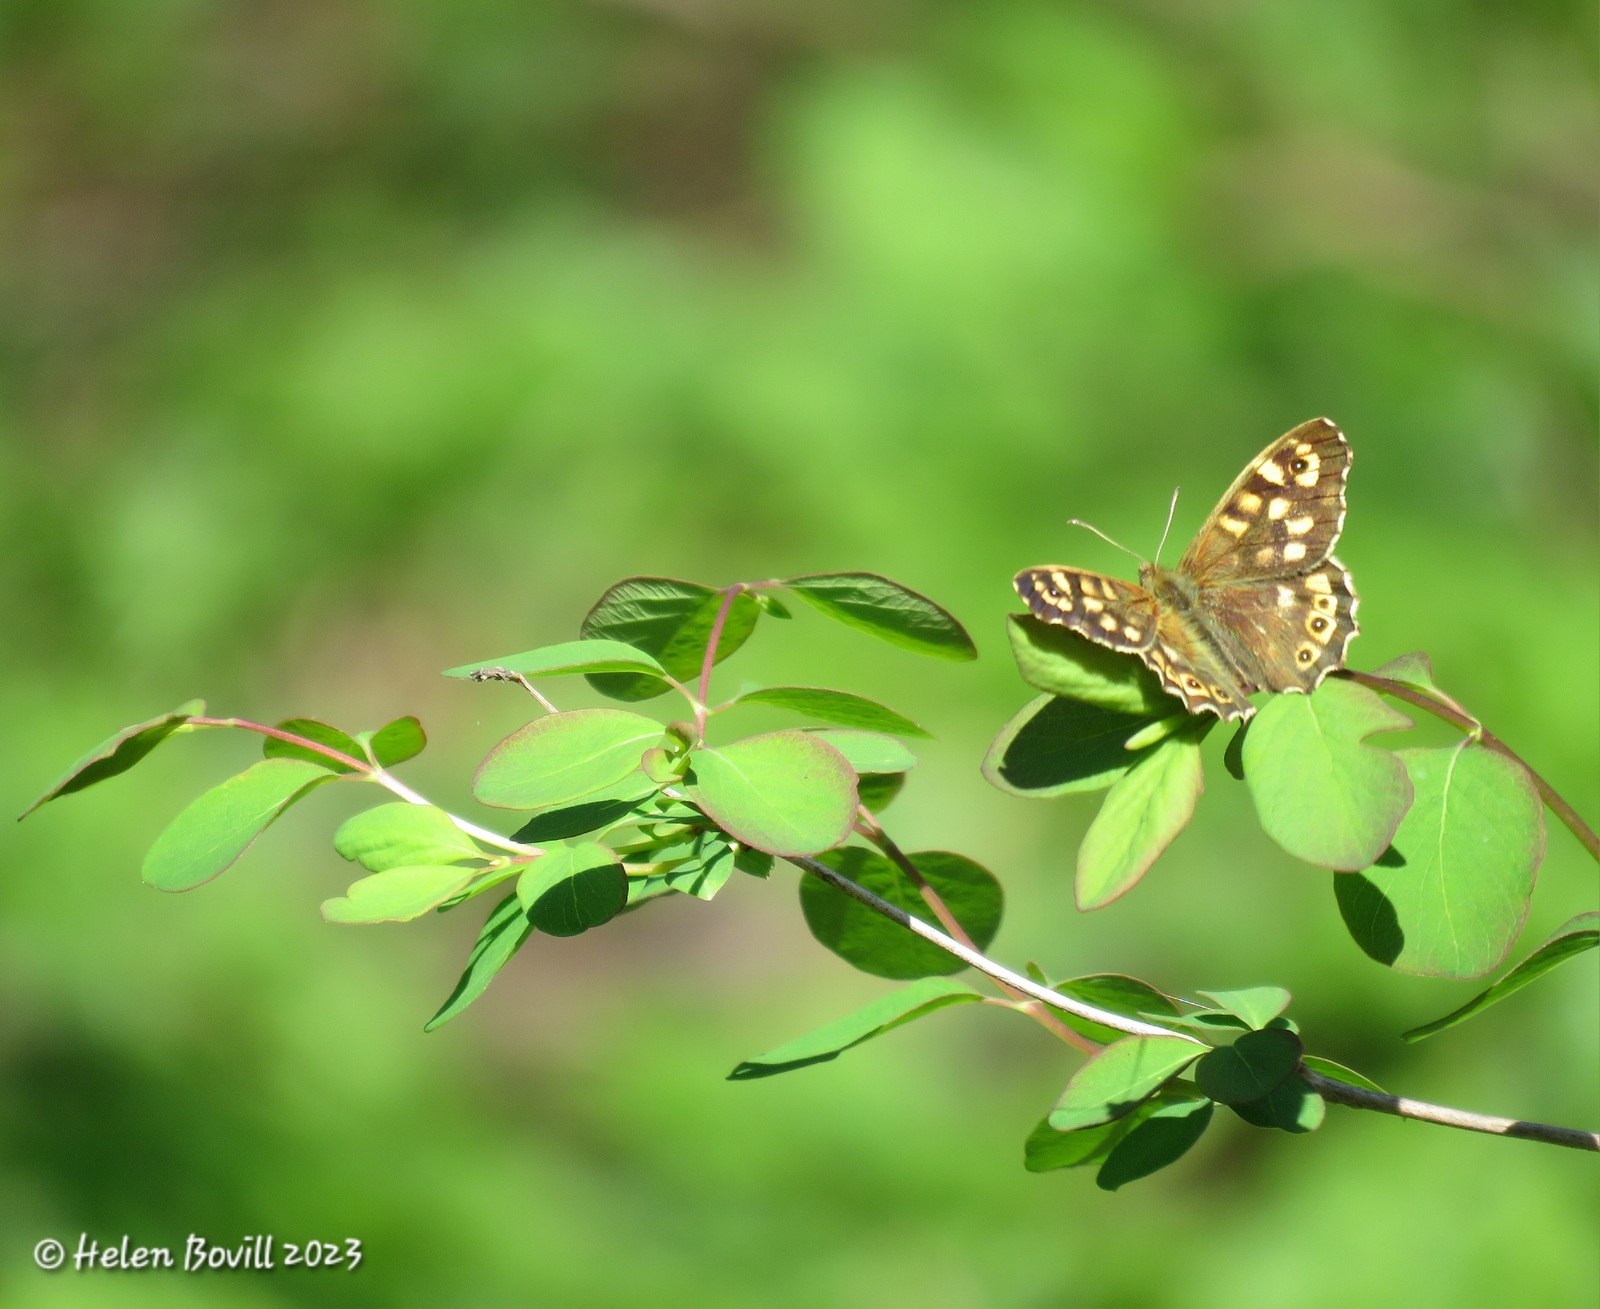 A Speckled Wood butterfly on a branch with green leaves on it